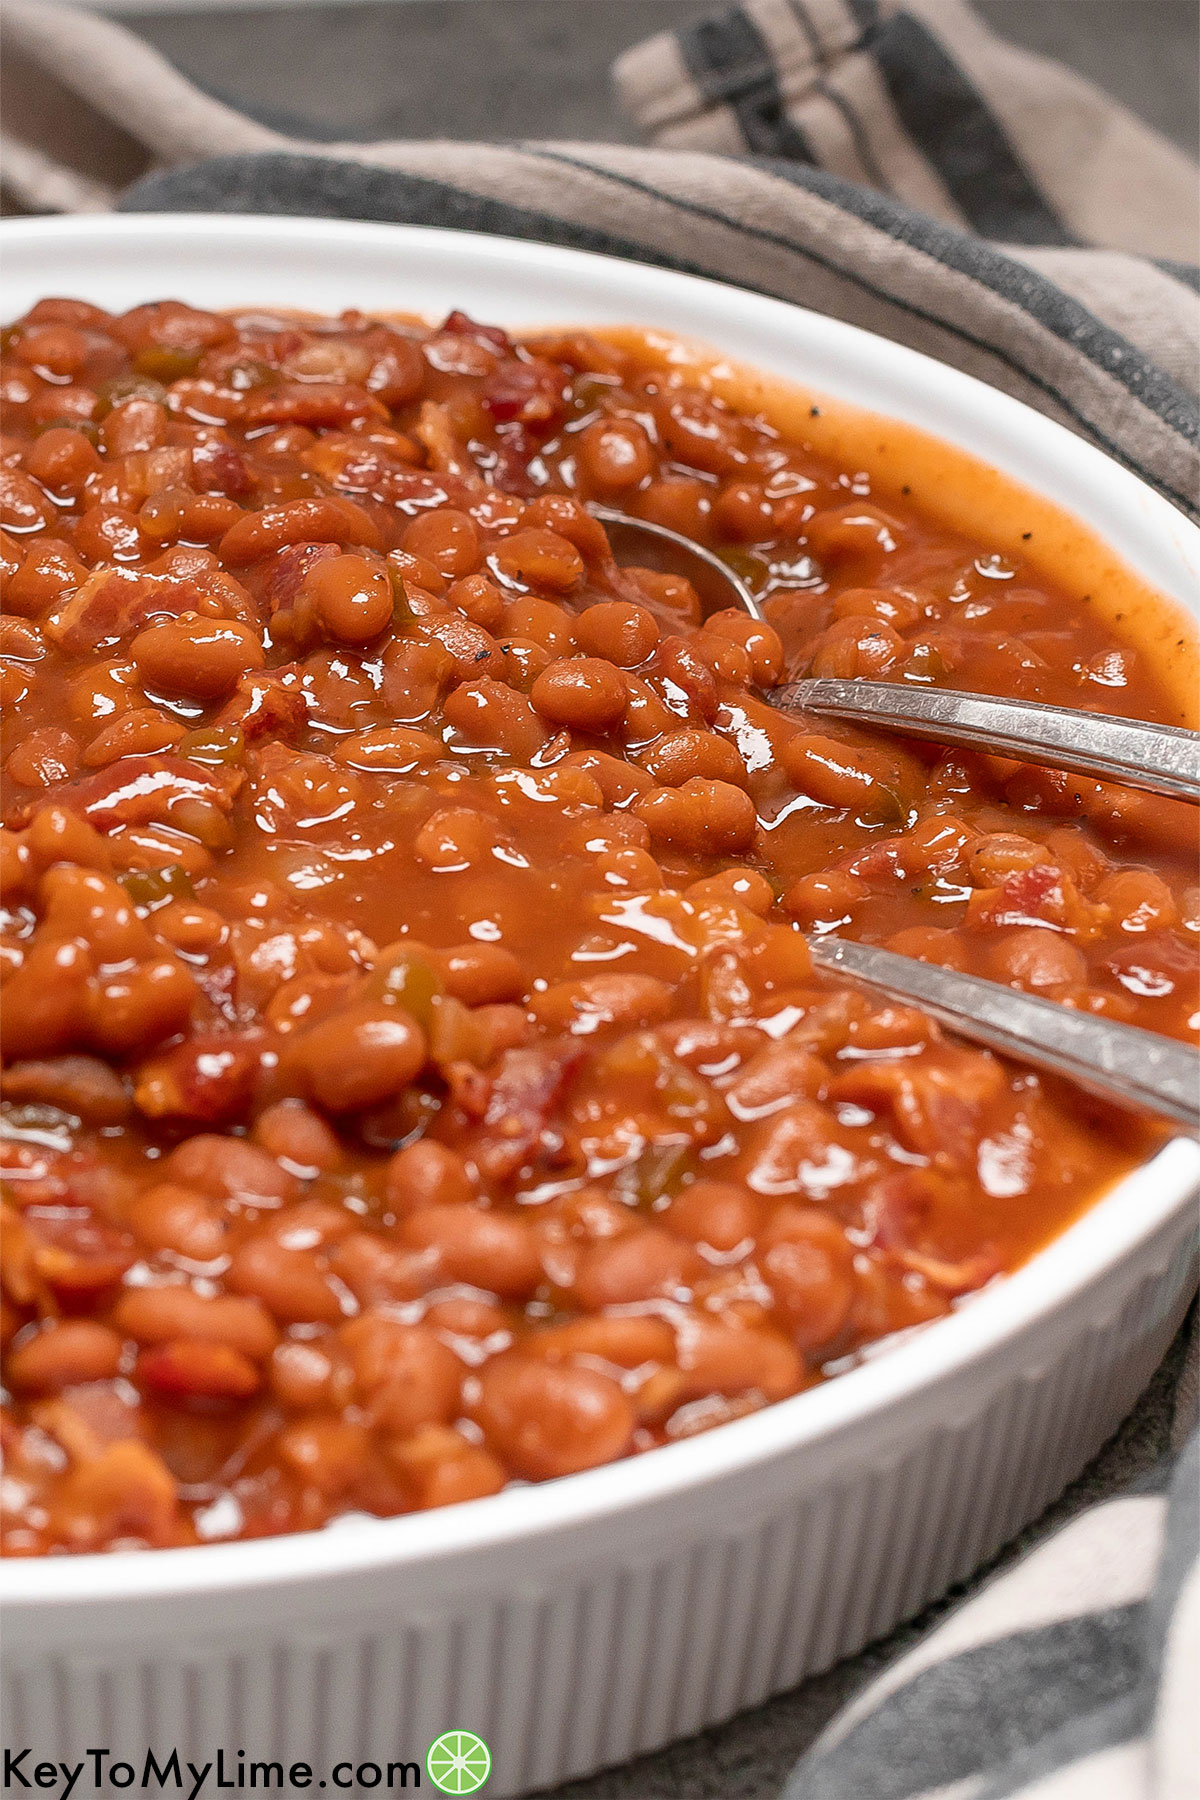 A close up image of crockpot baked beans with multiple metal spoons.